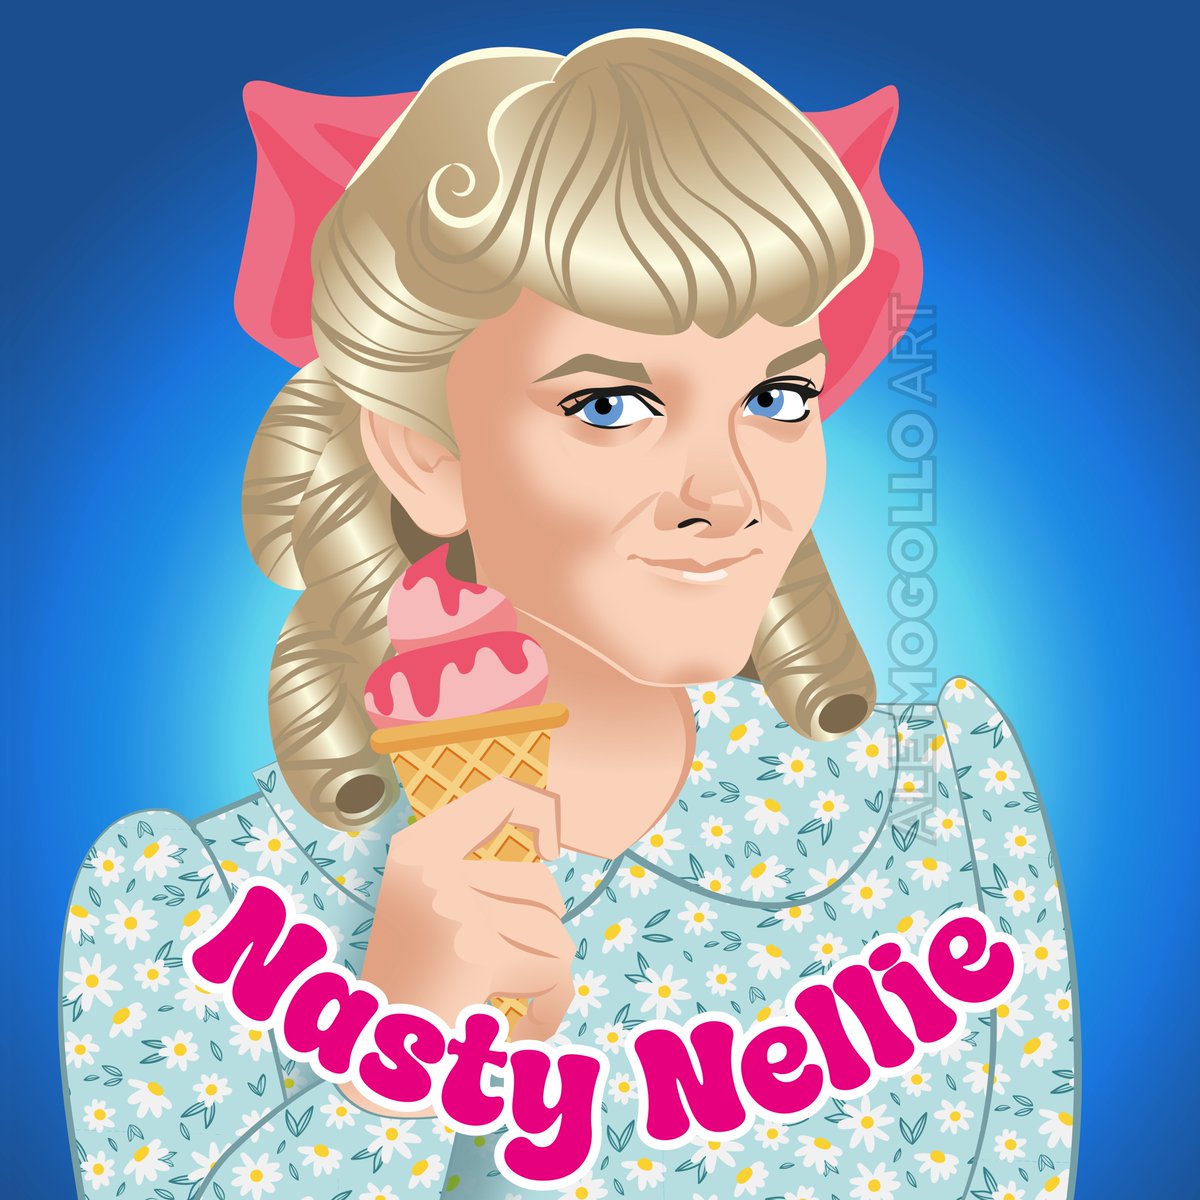 Nasty Nellie, the unforgettable character from Little House on the Prairie, played to perfection by the wonderful Alison Arngrim. The beloved classic tv show is celebrating its 50th anniversary this year. Were you a fan?
#littlehouseontheprairie #nastynellie #allisonarngrim